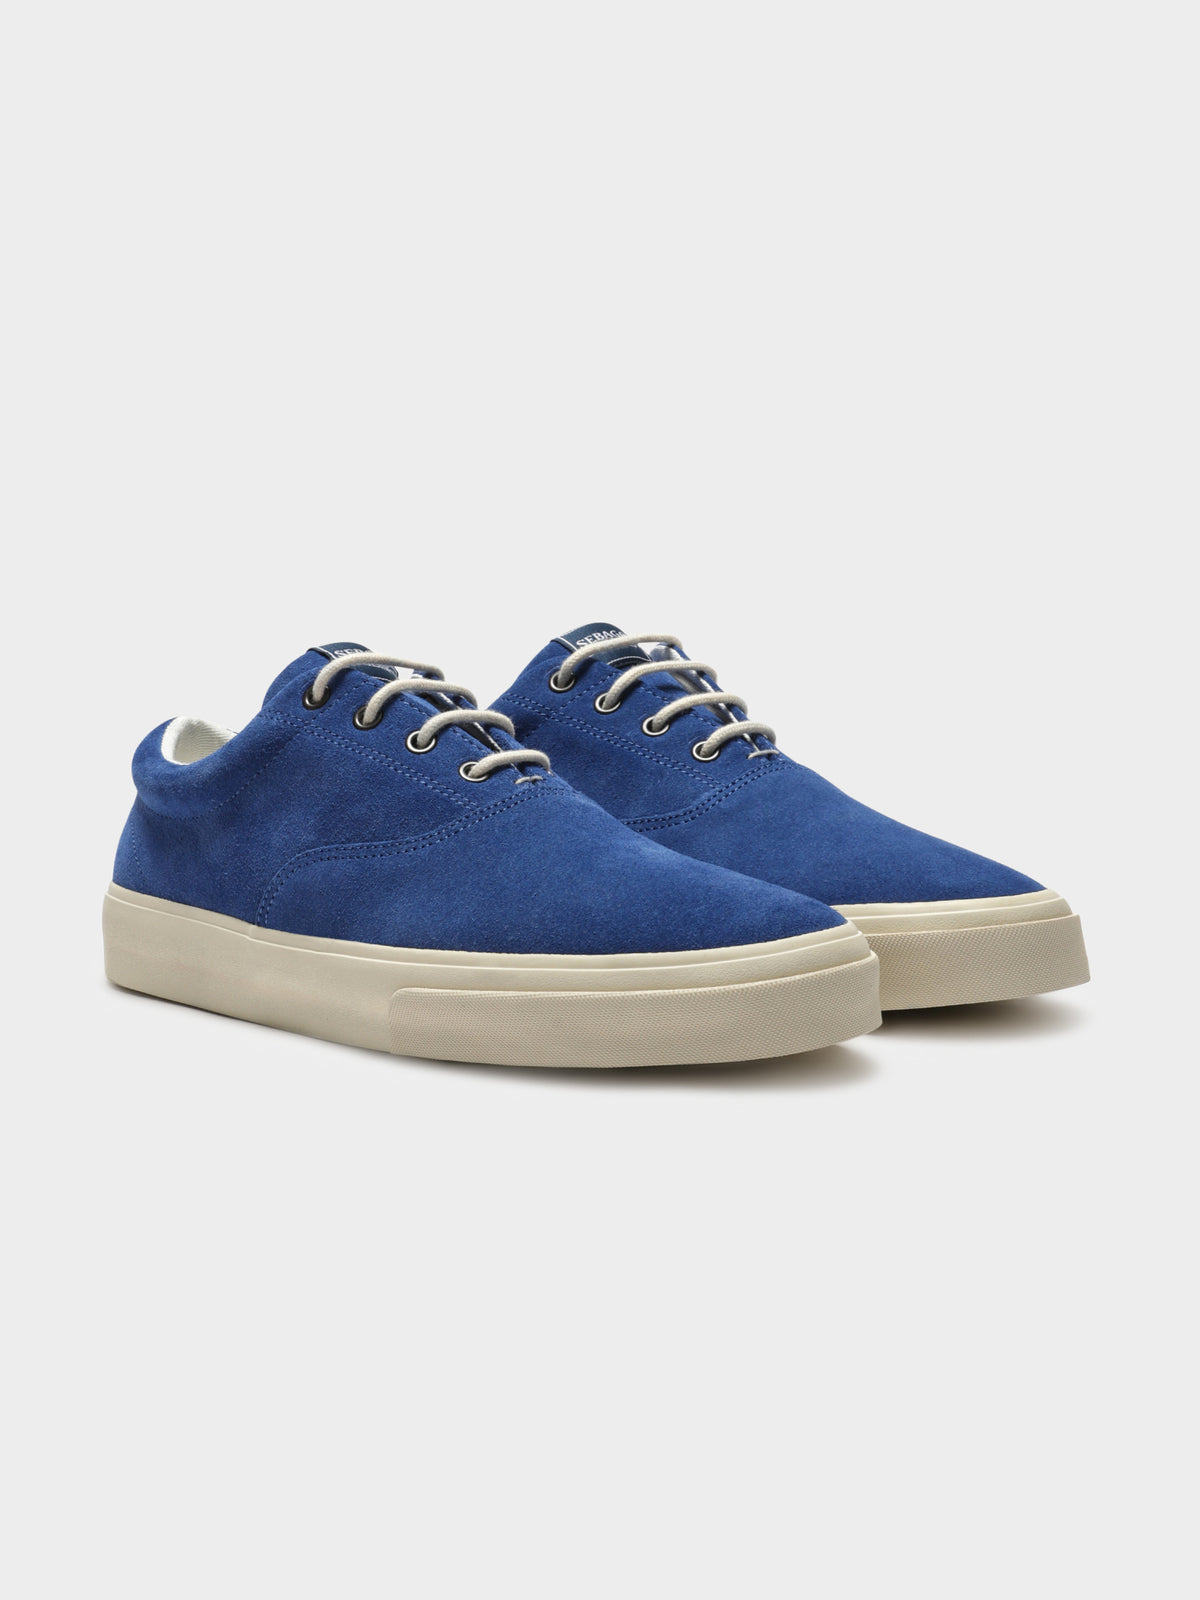 John Suede Shoes in Blue